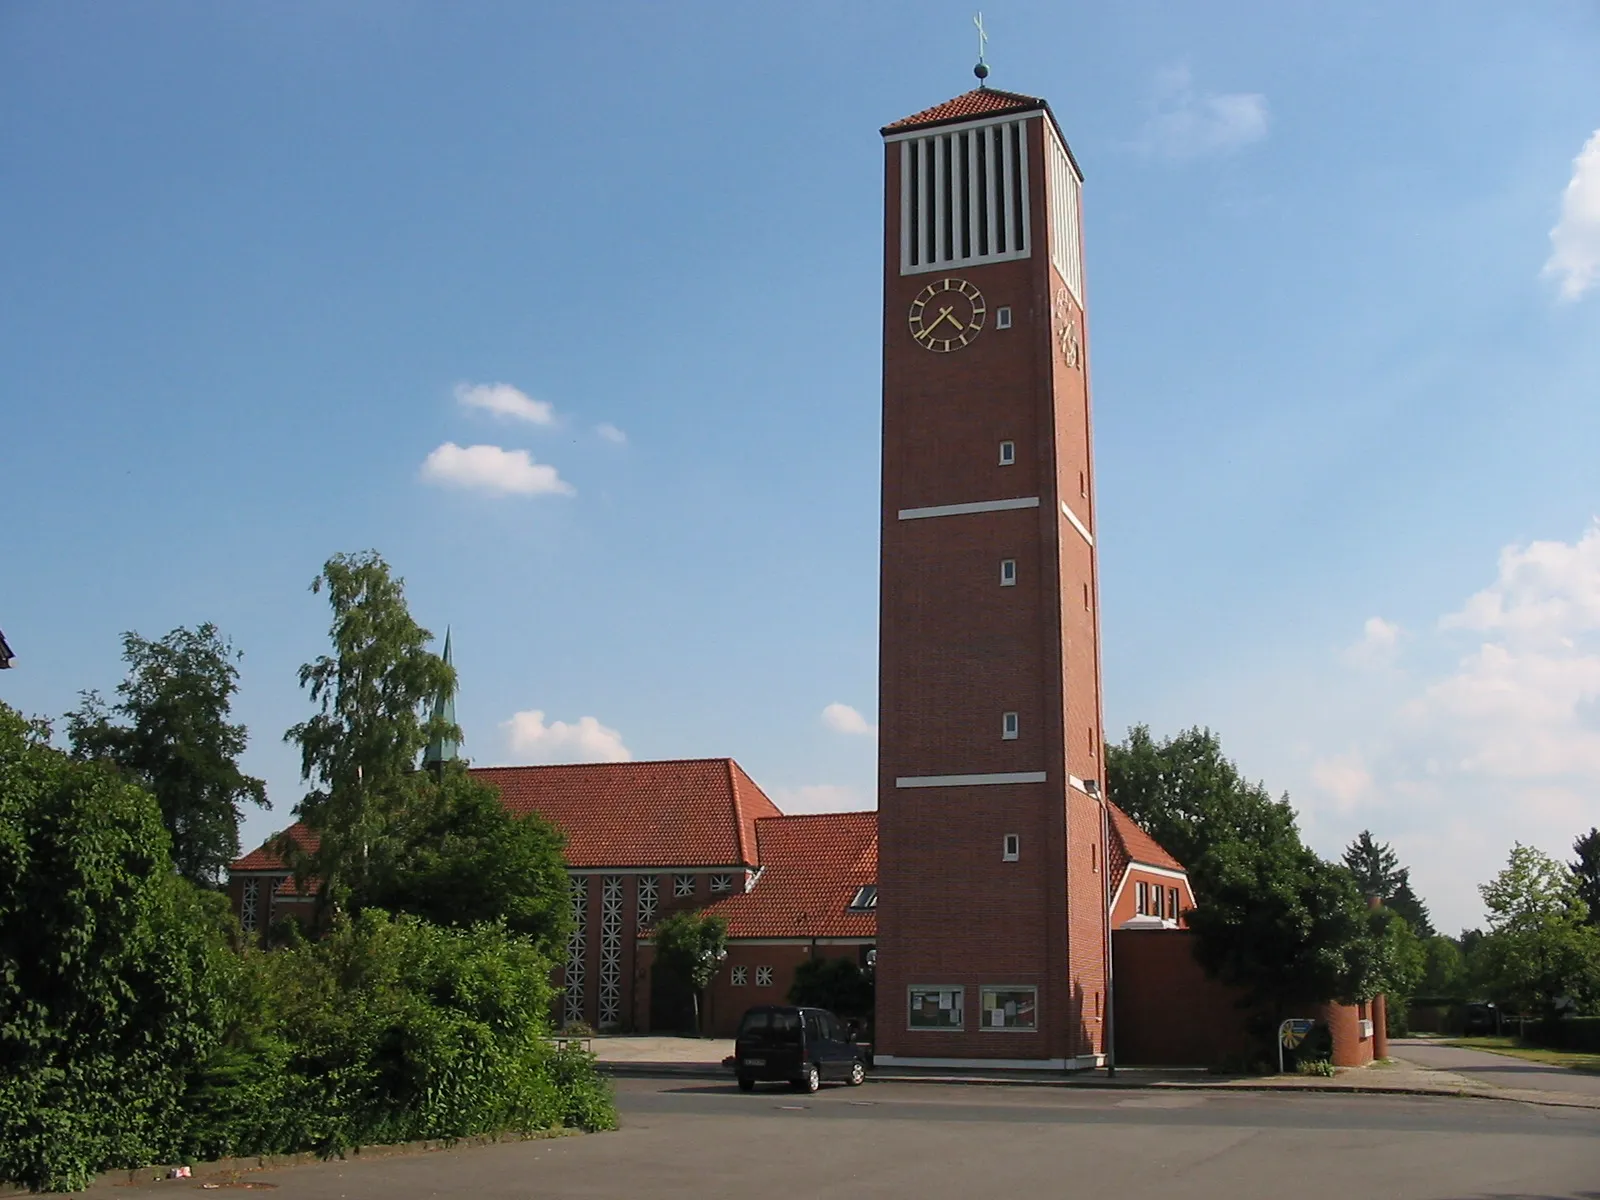 Photo showing: The church "Christuskirche Westercelle" was built 1962 and you can find it in a part of the city Celle/Germany named Westercelle.